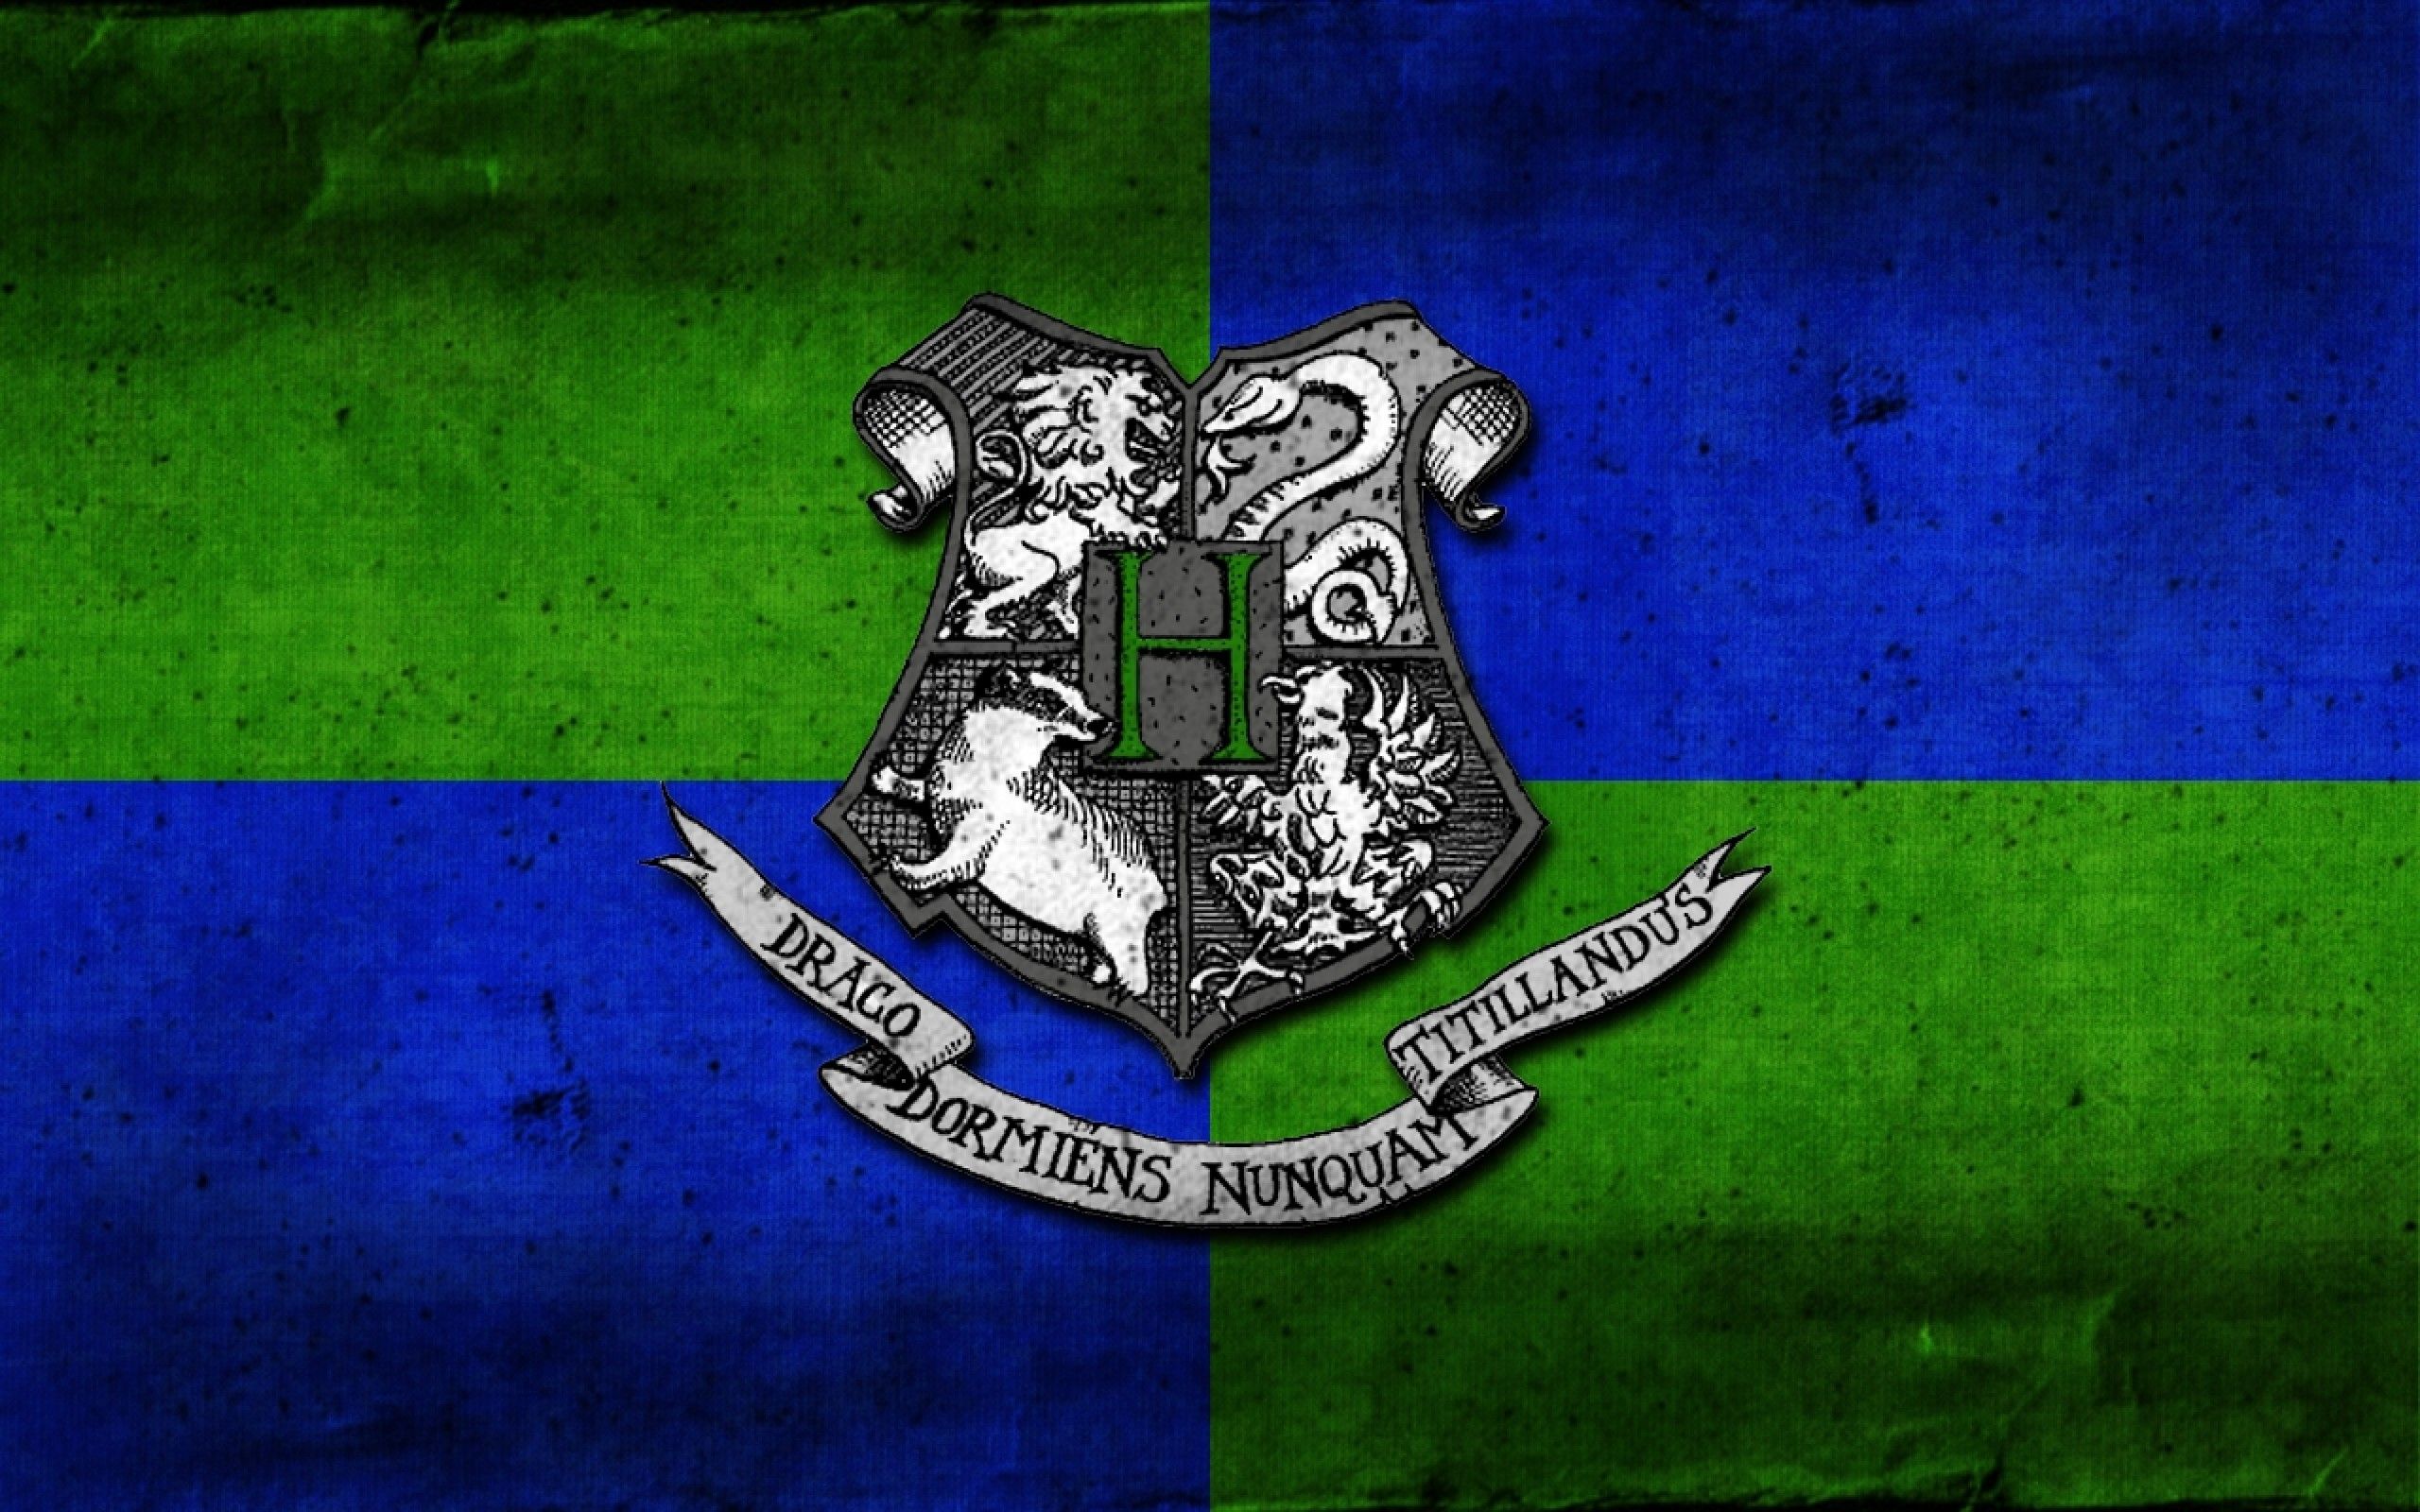 Hd Wallpaper Potter Slytherin And Ravenclaw, Download Wallpaper